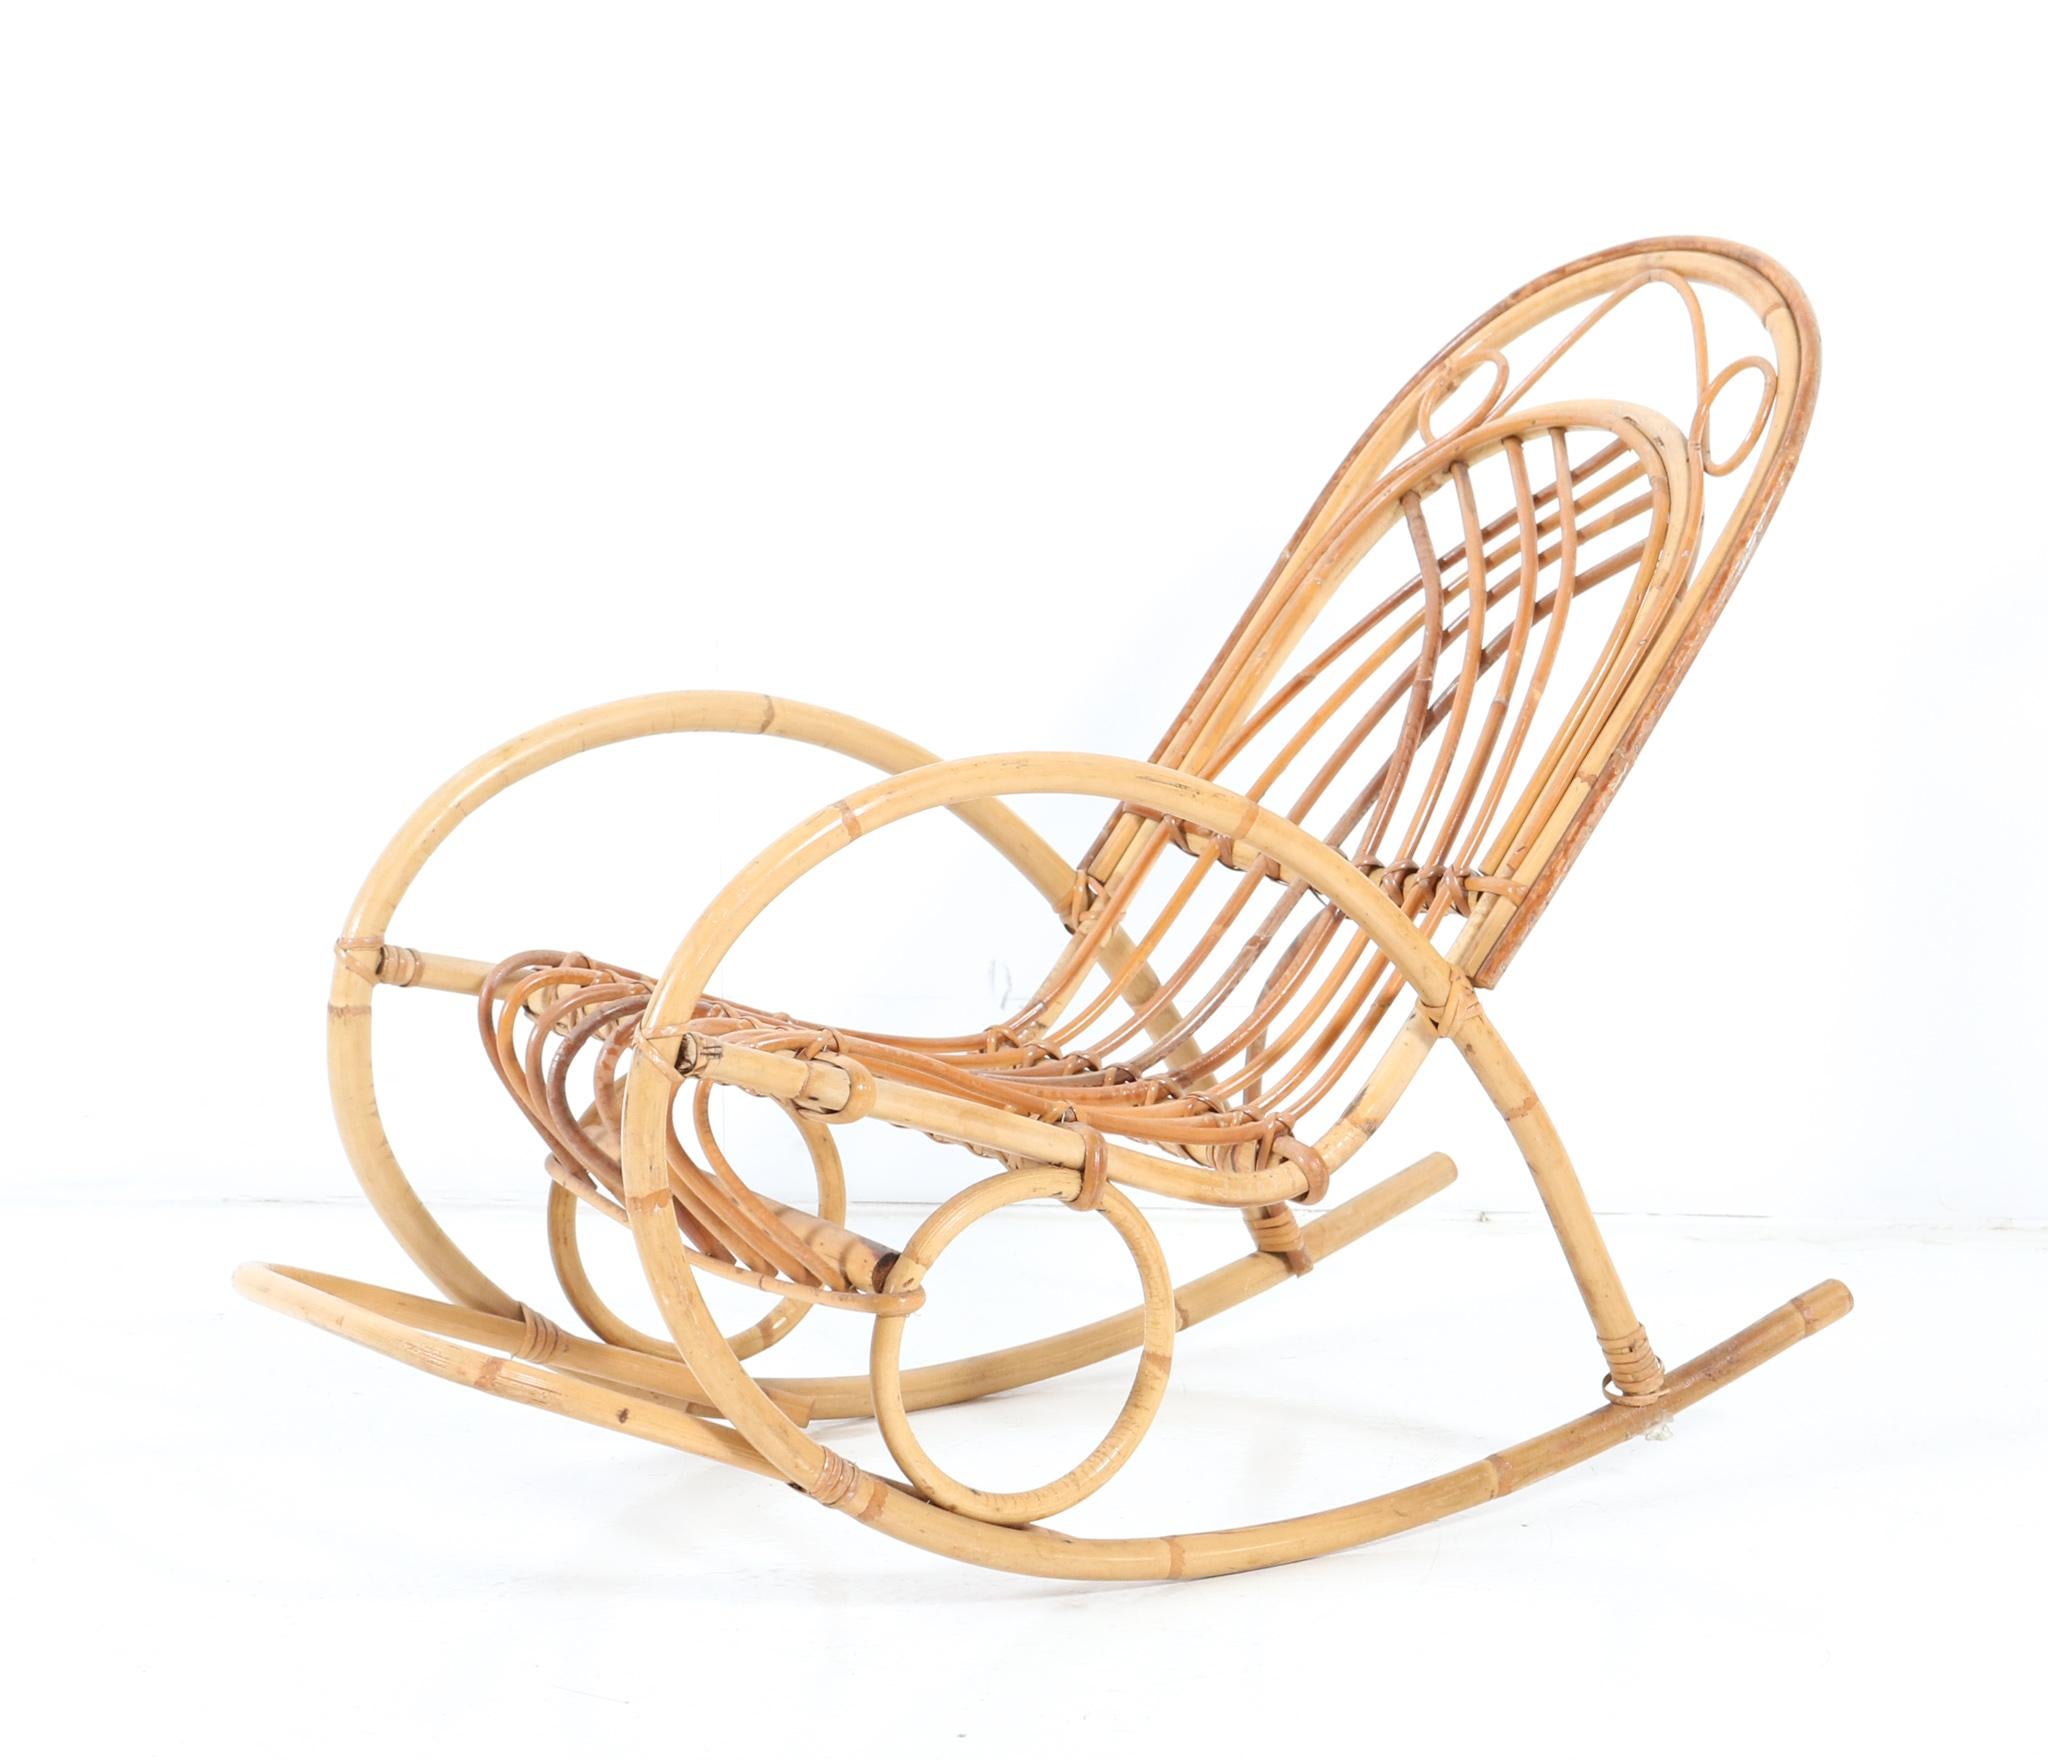 Stunning and rare Mid-Century Modern children's rocking chair.
Striking French design from the 1970s.
Executed in bamboo and rattan.
This wonderful Mid-Century Modern children's rocking chair is in very good original condition with minor wear